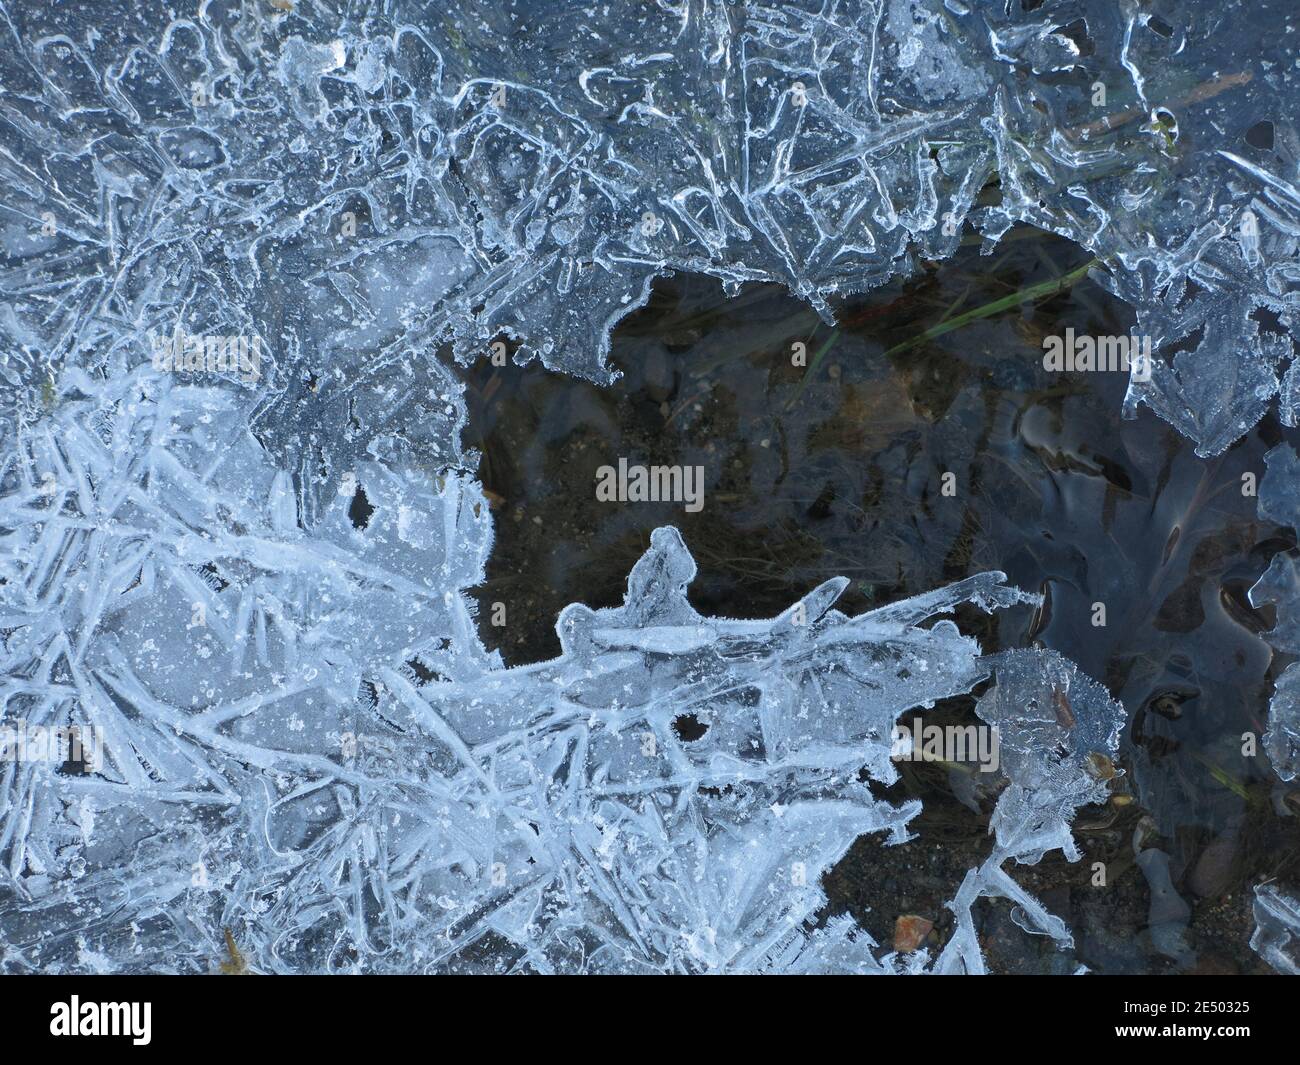 Skating over thin ice: abstract photo of glacial frozen ice crystals in beautiful shapes formed alongside pools of dark deep water. Stock Photo